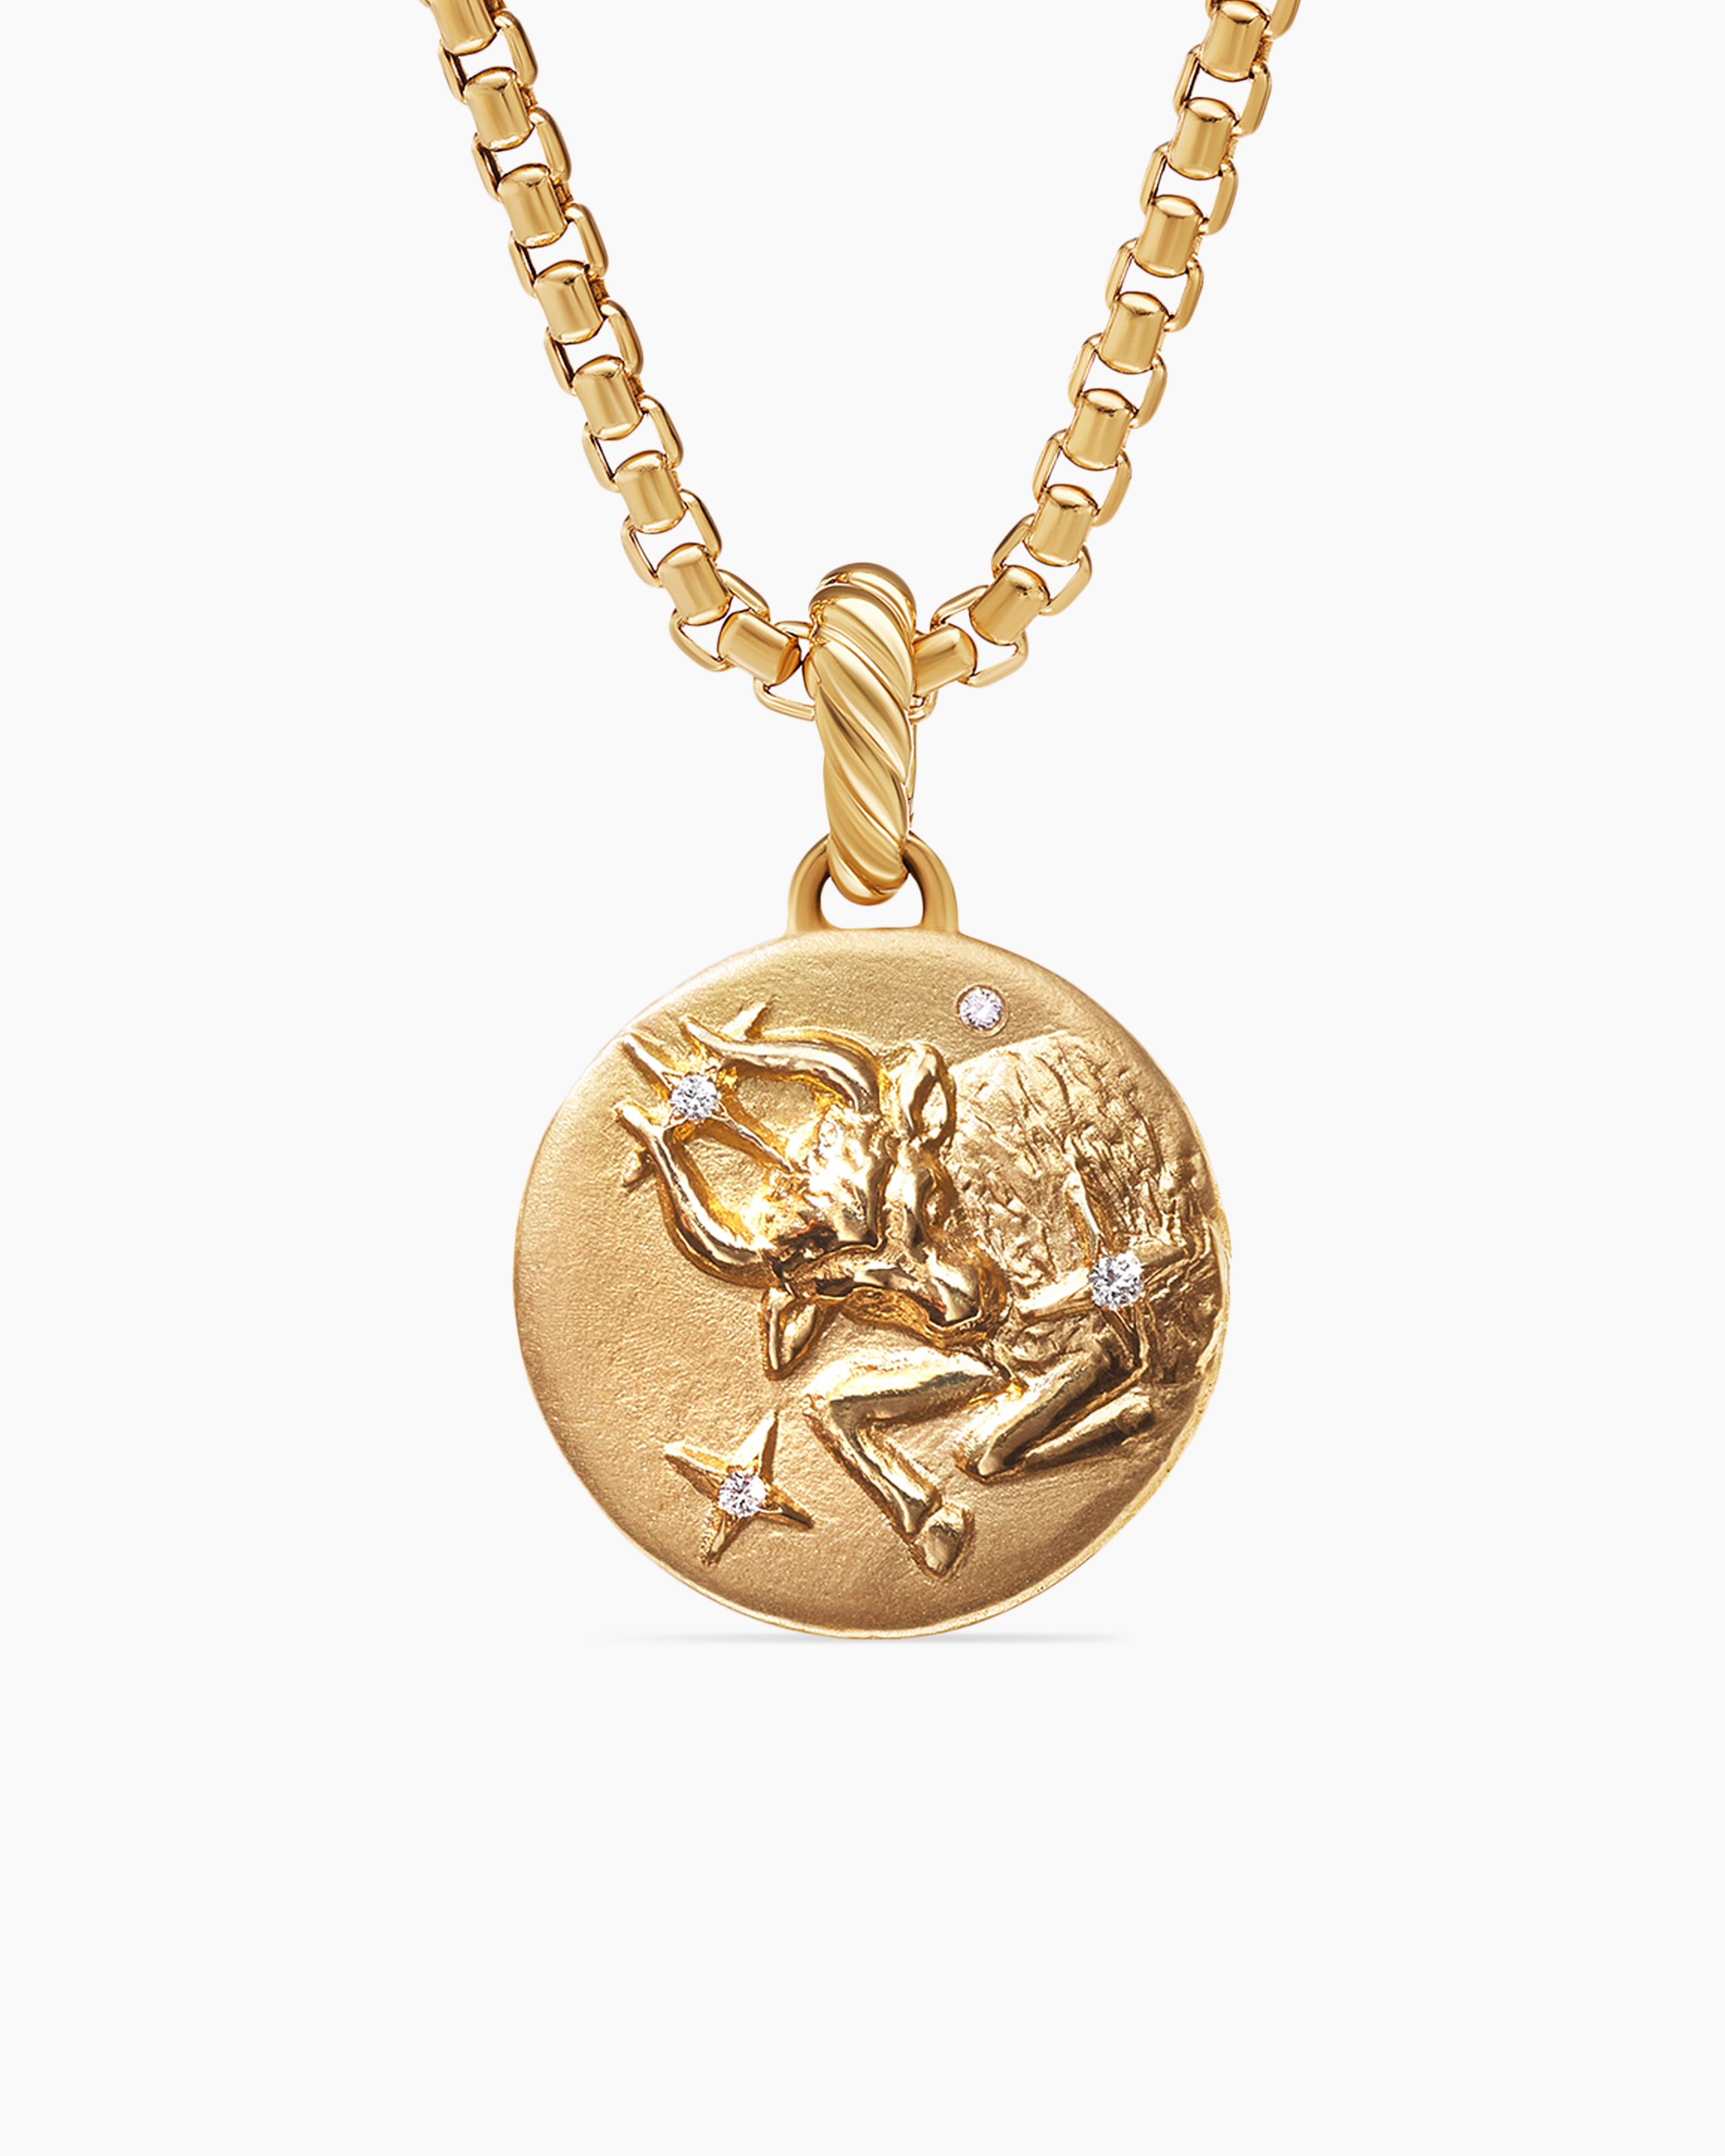 Buy Taurus Zodiac Sign Pendant, 10K Solid Gold Taurus Necklace, Birthday  Gift for April 22 May 21, Nts for Daughter Online in India - Etsy